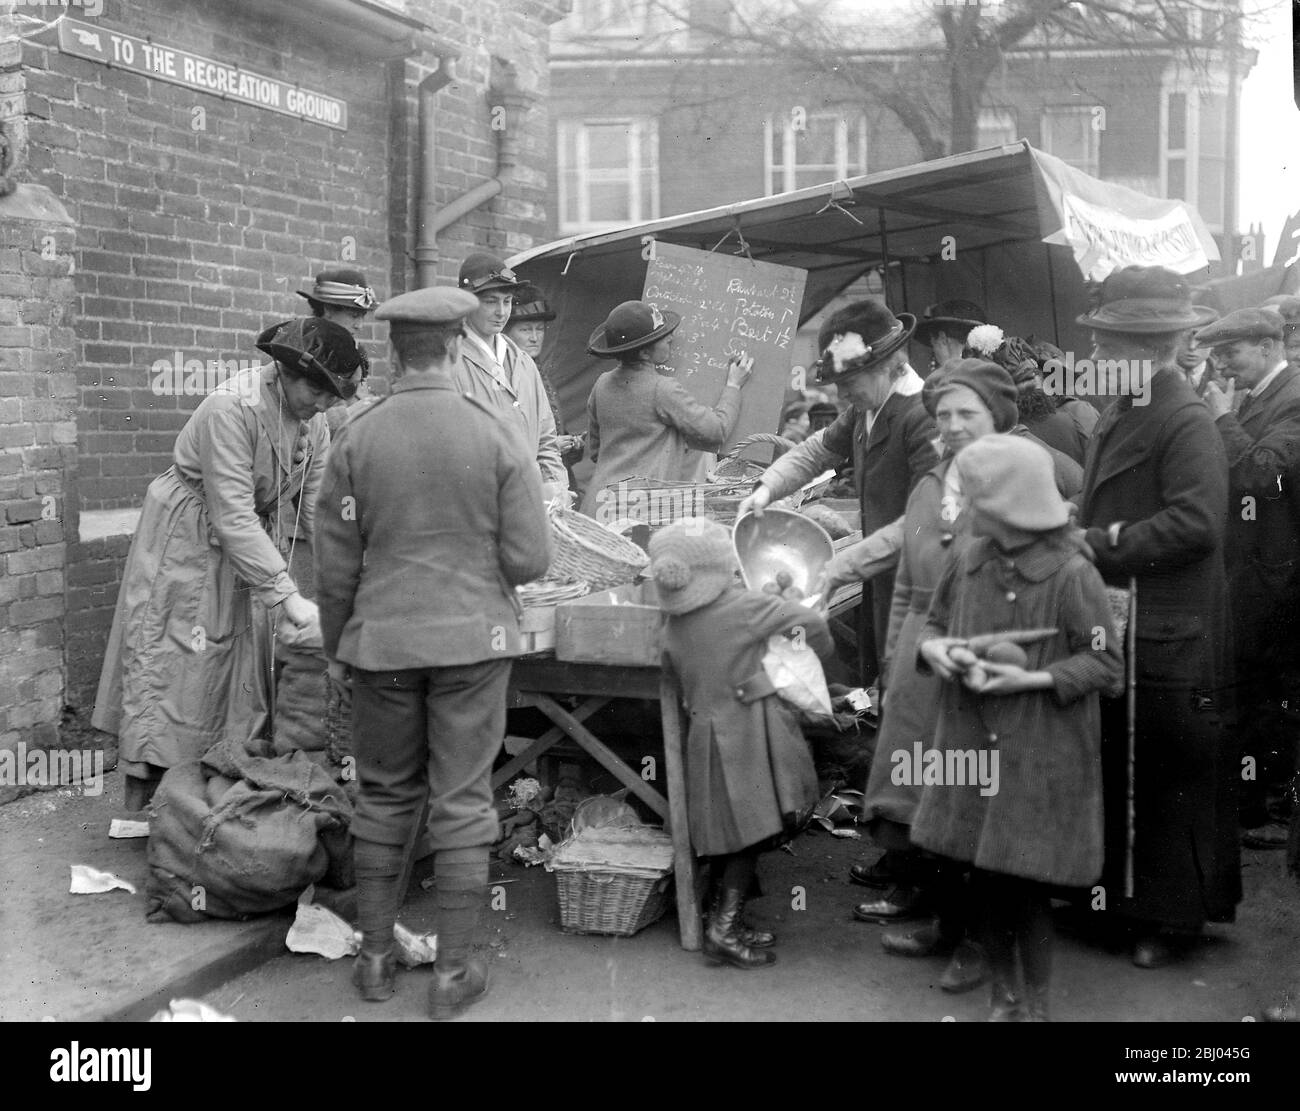 Lady Petre has opened a stall in Chelmsford Market to bring more produce into the town during the scarcity. - 23rd February 1918 Stock Photo